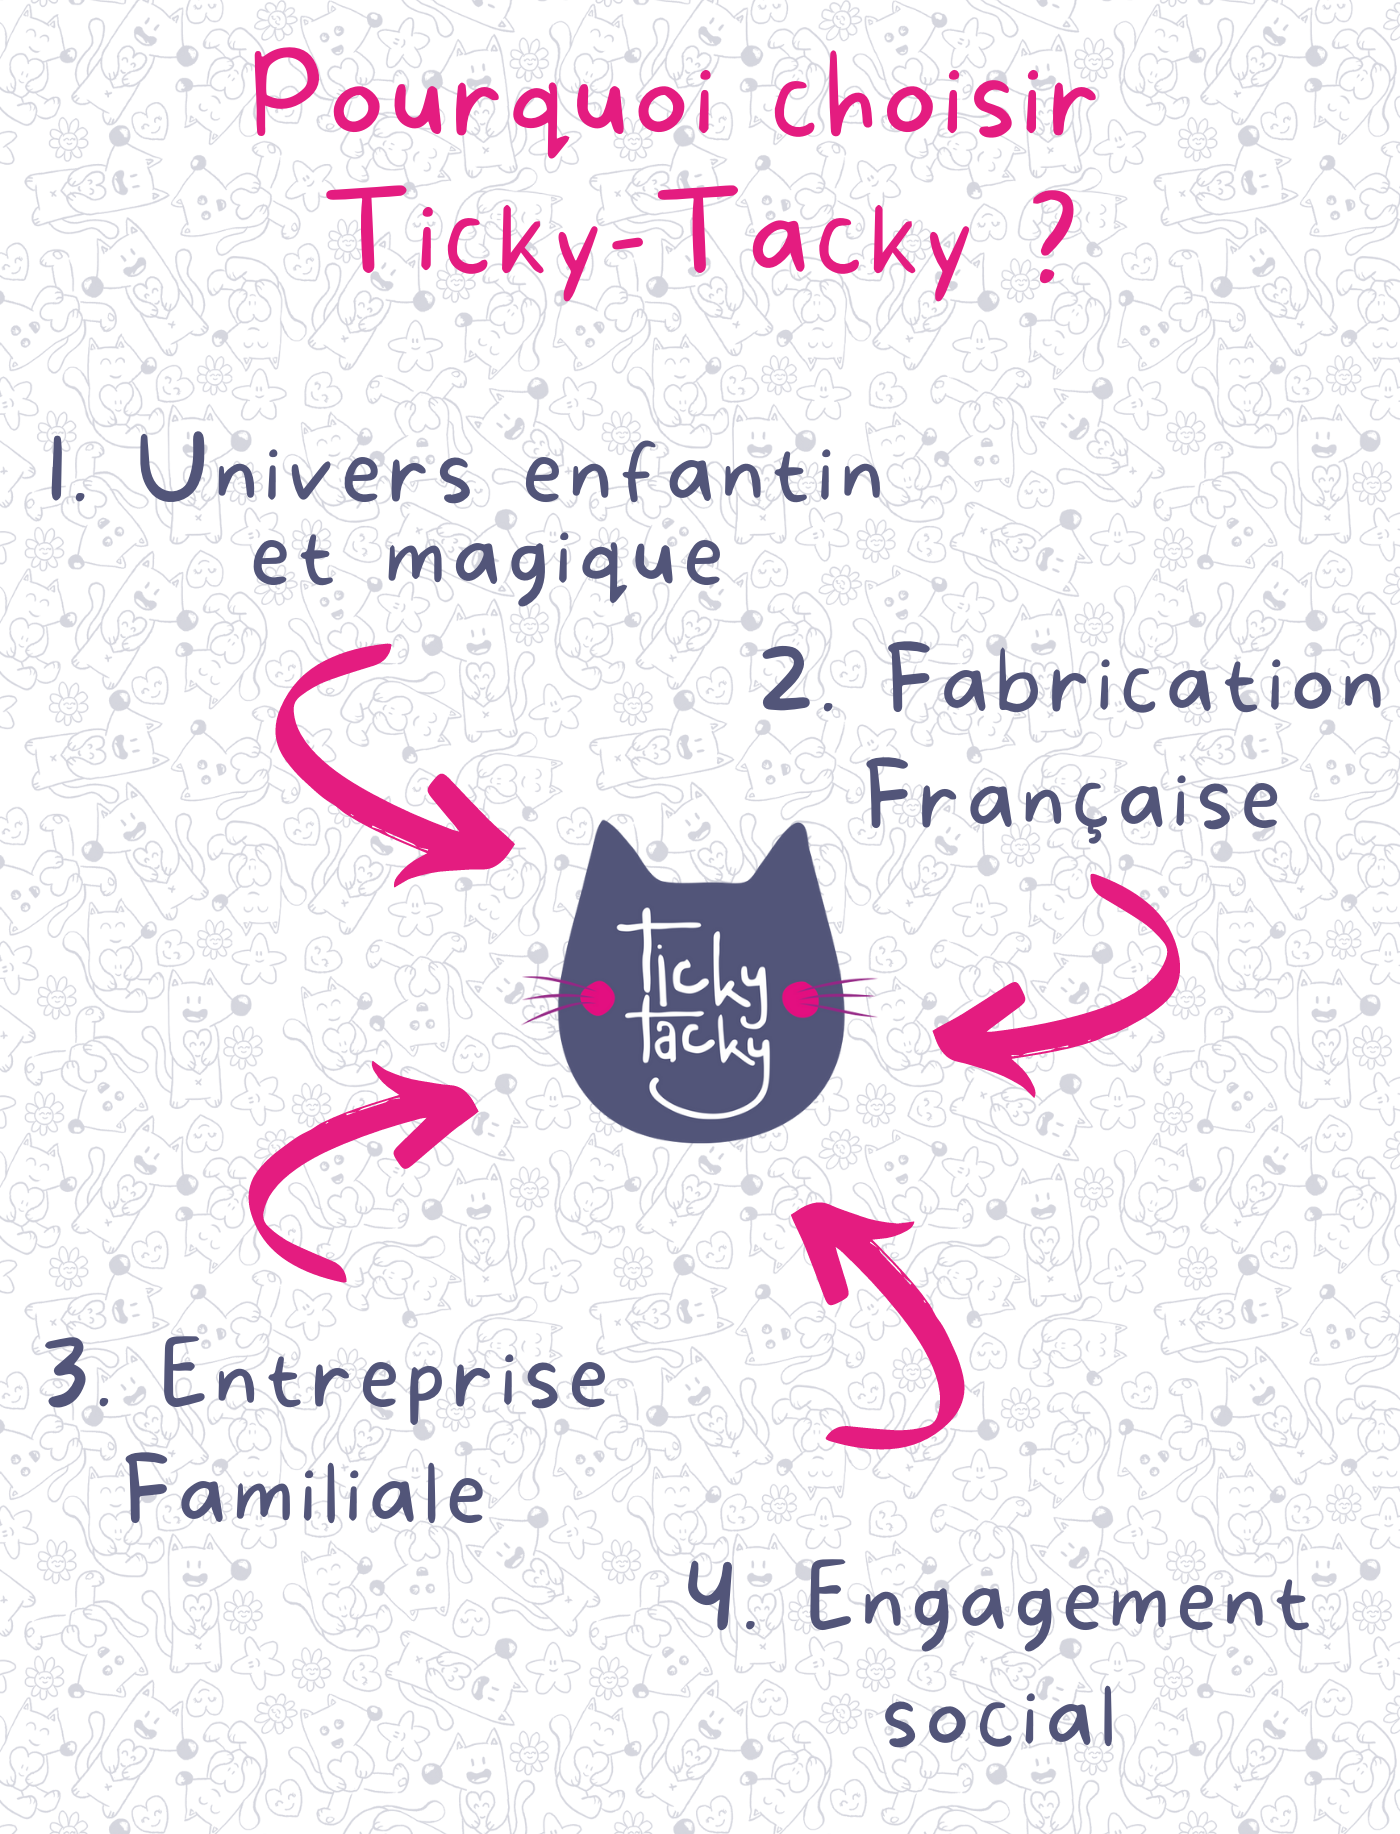 07 - Pourquoi choisir Ticky-Tacky.png